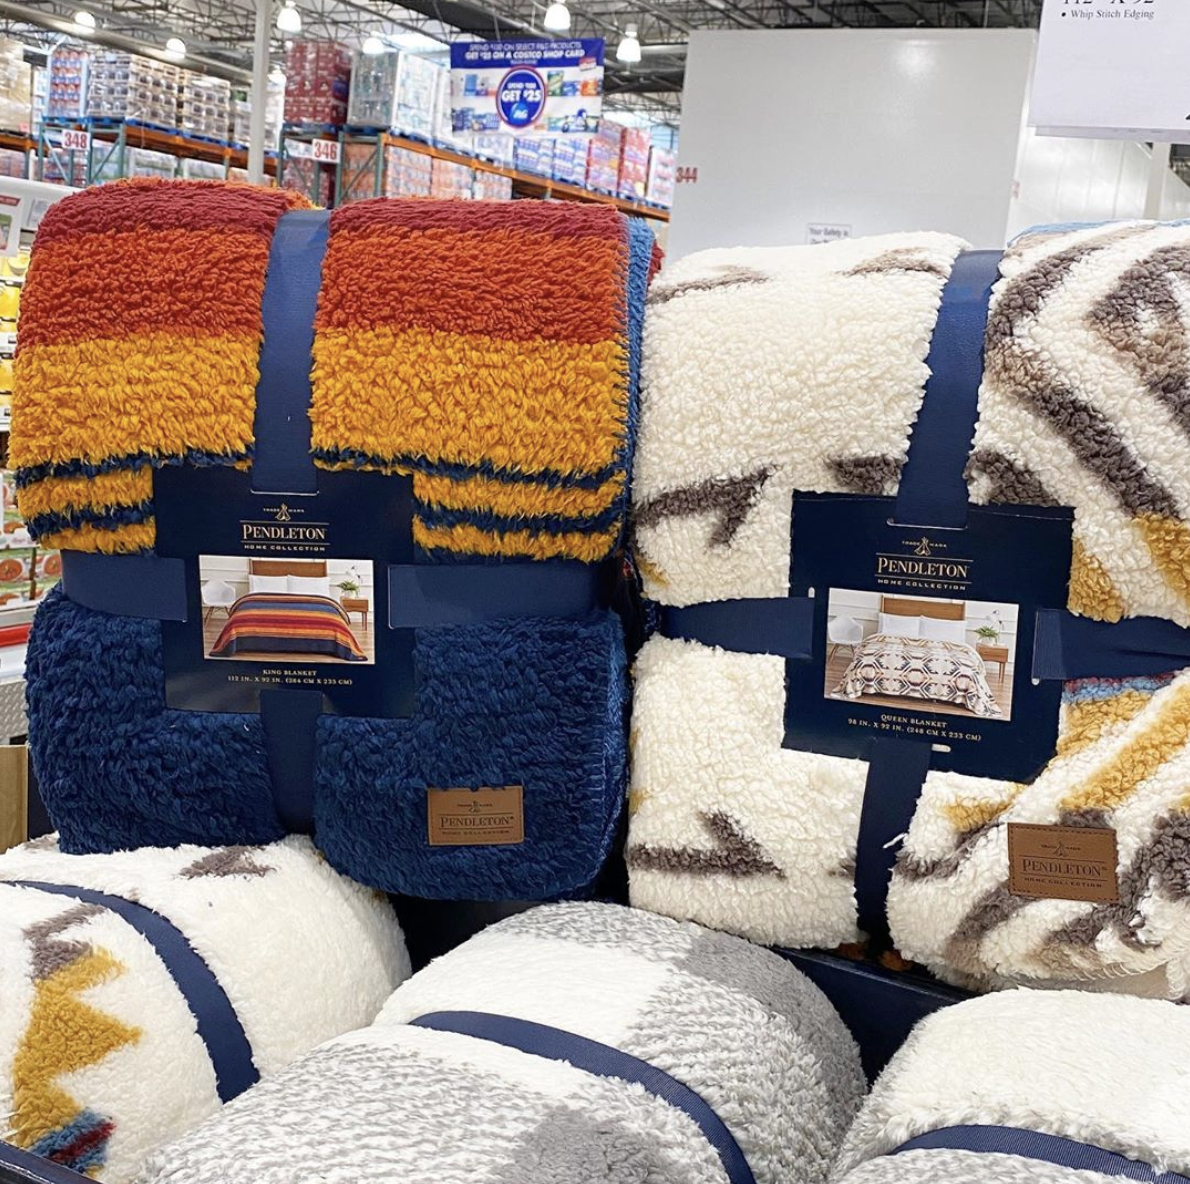 Why are Pendleton Blankets So Expensive